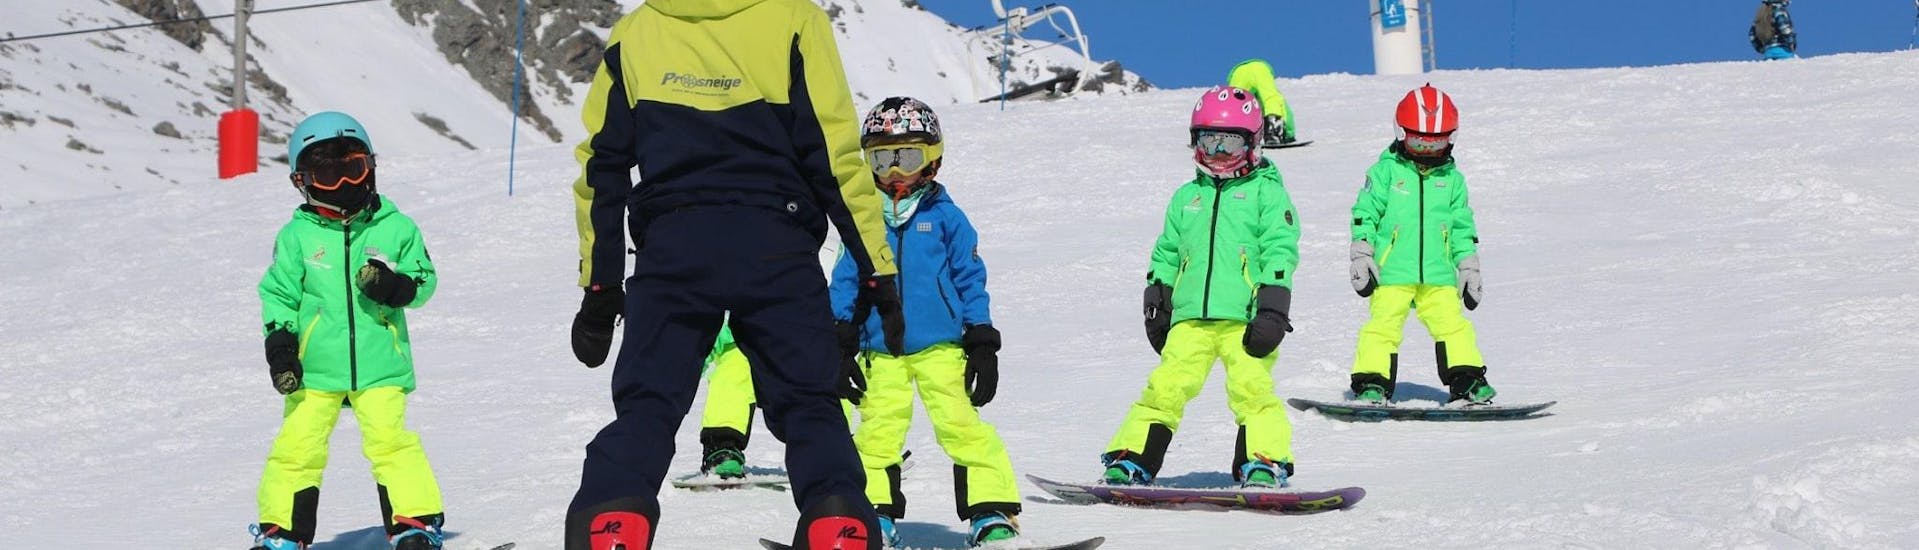 An instructor from the ski school Prosneige Alpe d'Huez is teaching smiling kids during Kids Snowboarding Lessons (5-13 y.) for All Levels.